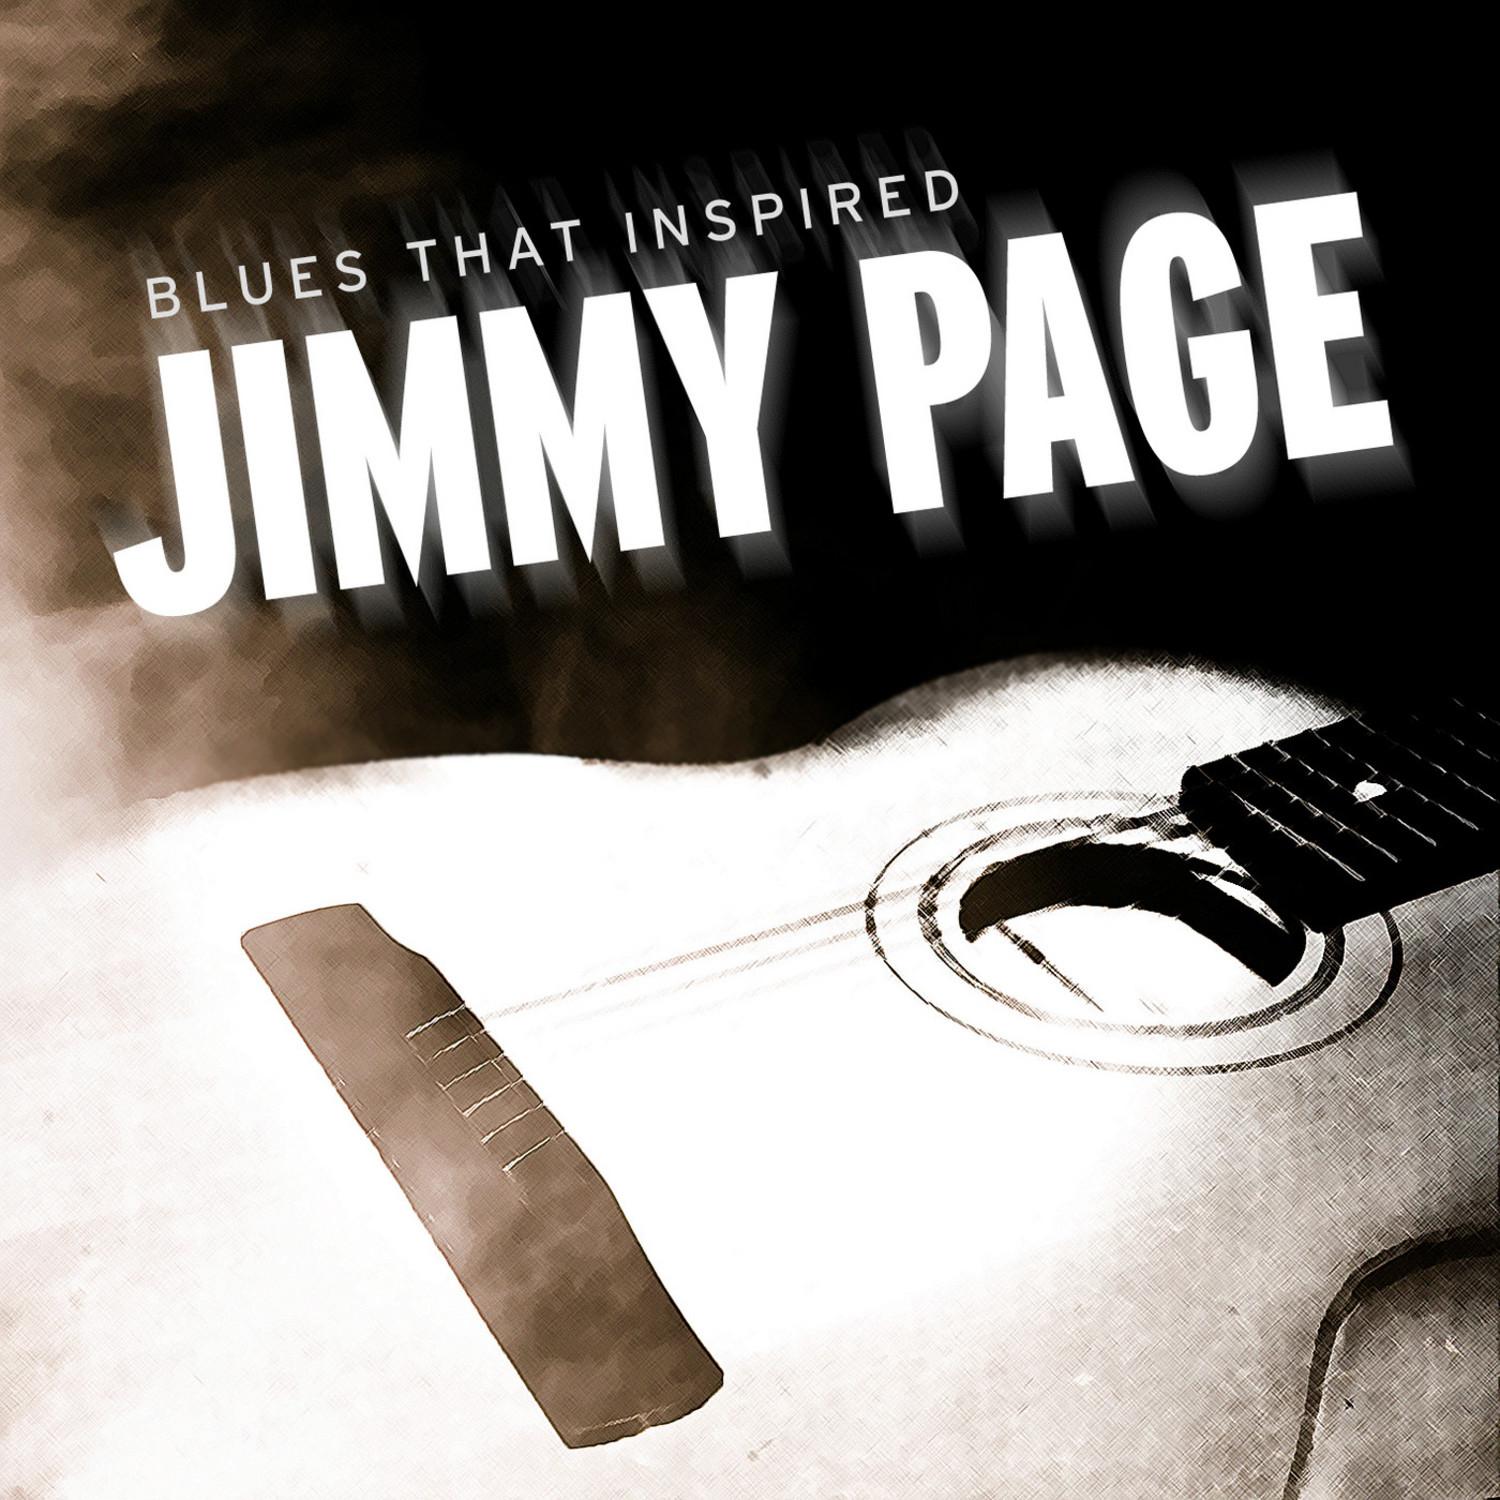 Blues That Inspired Jimmy Page